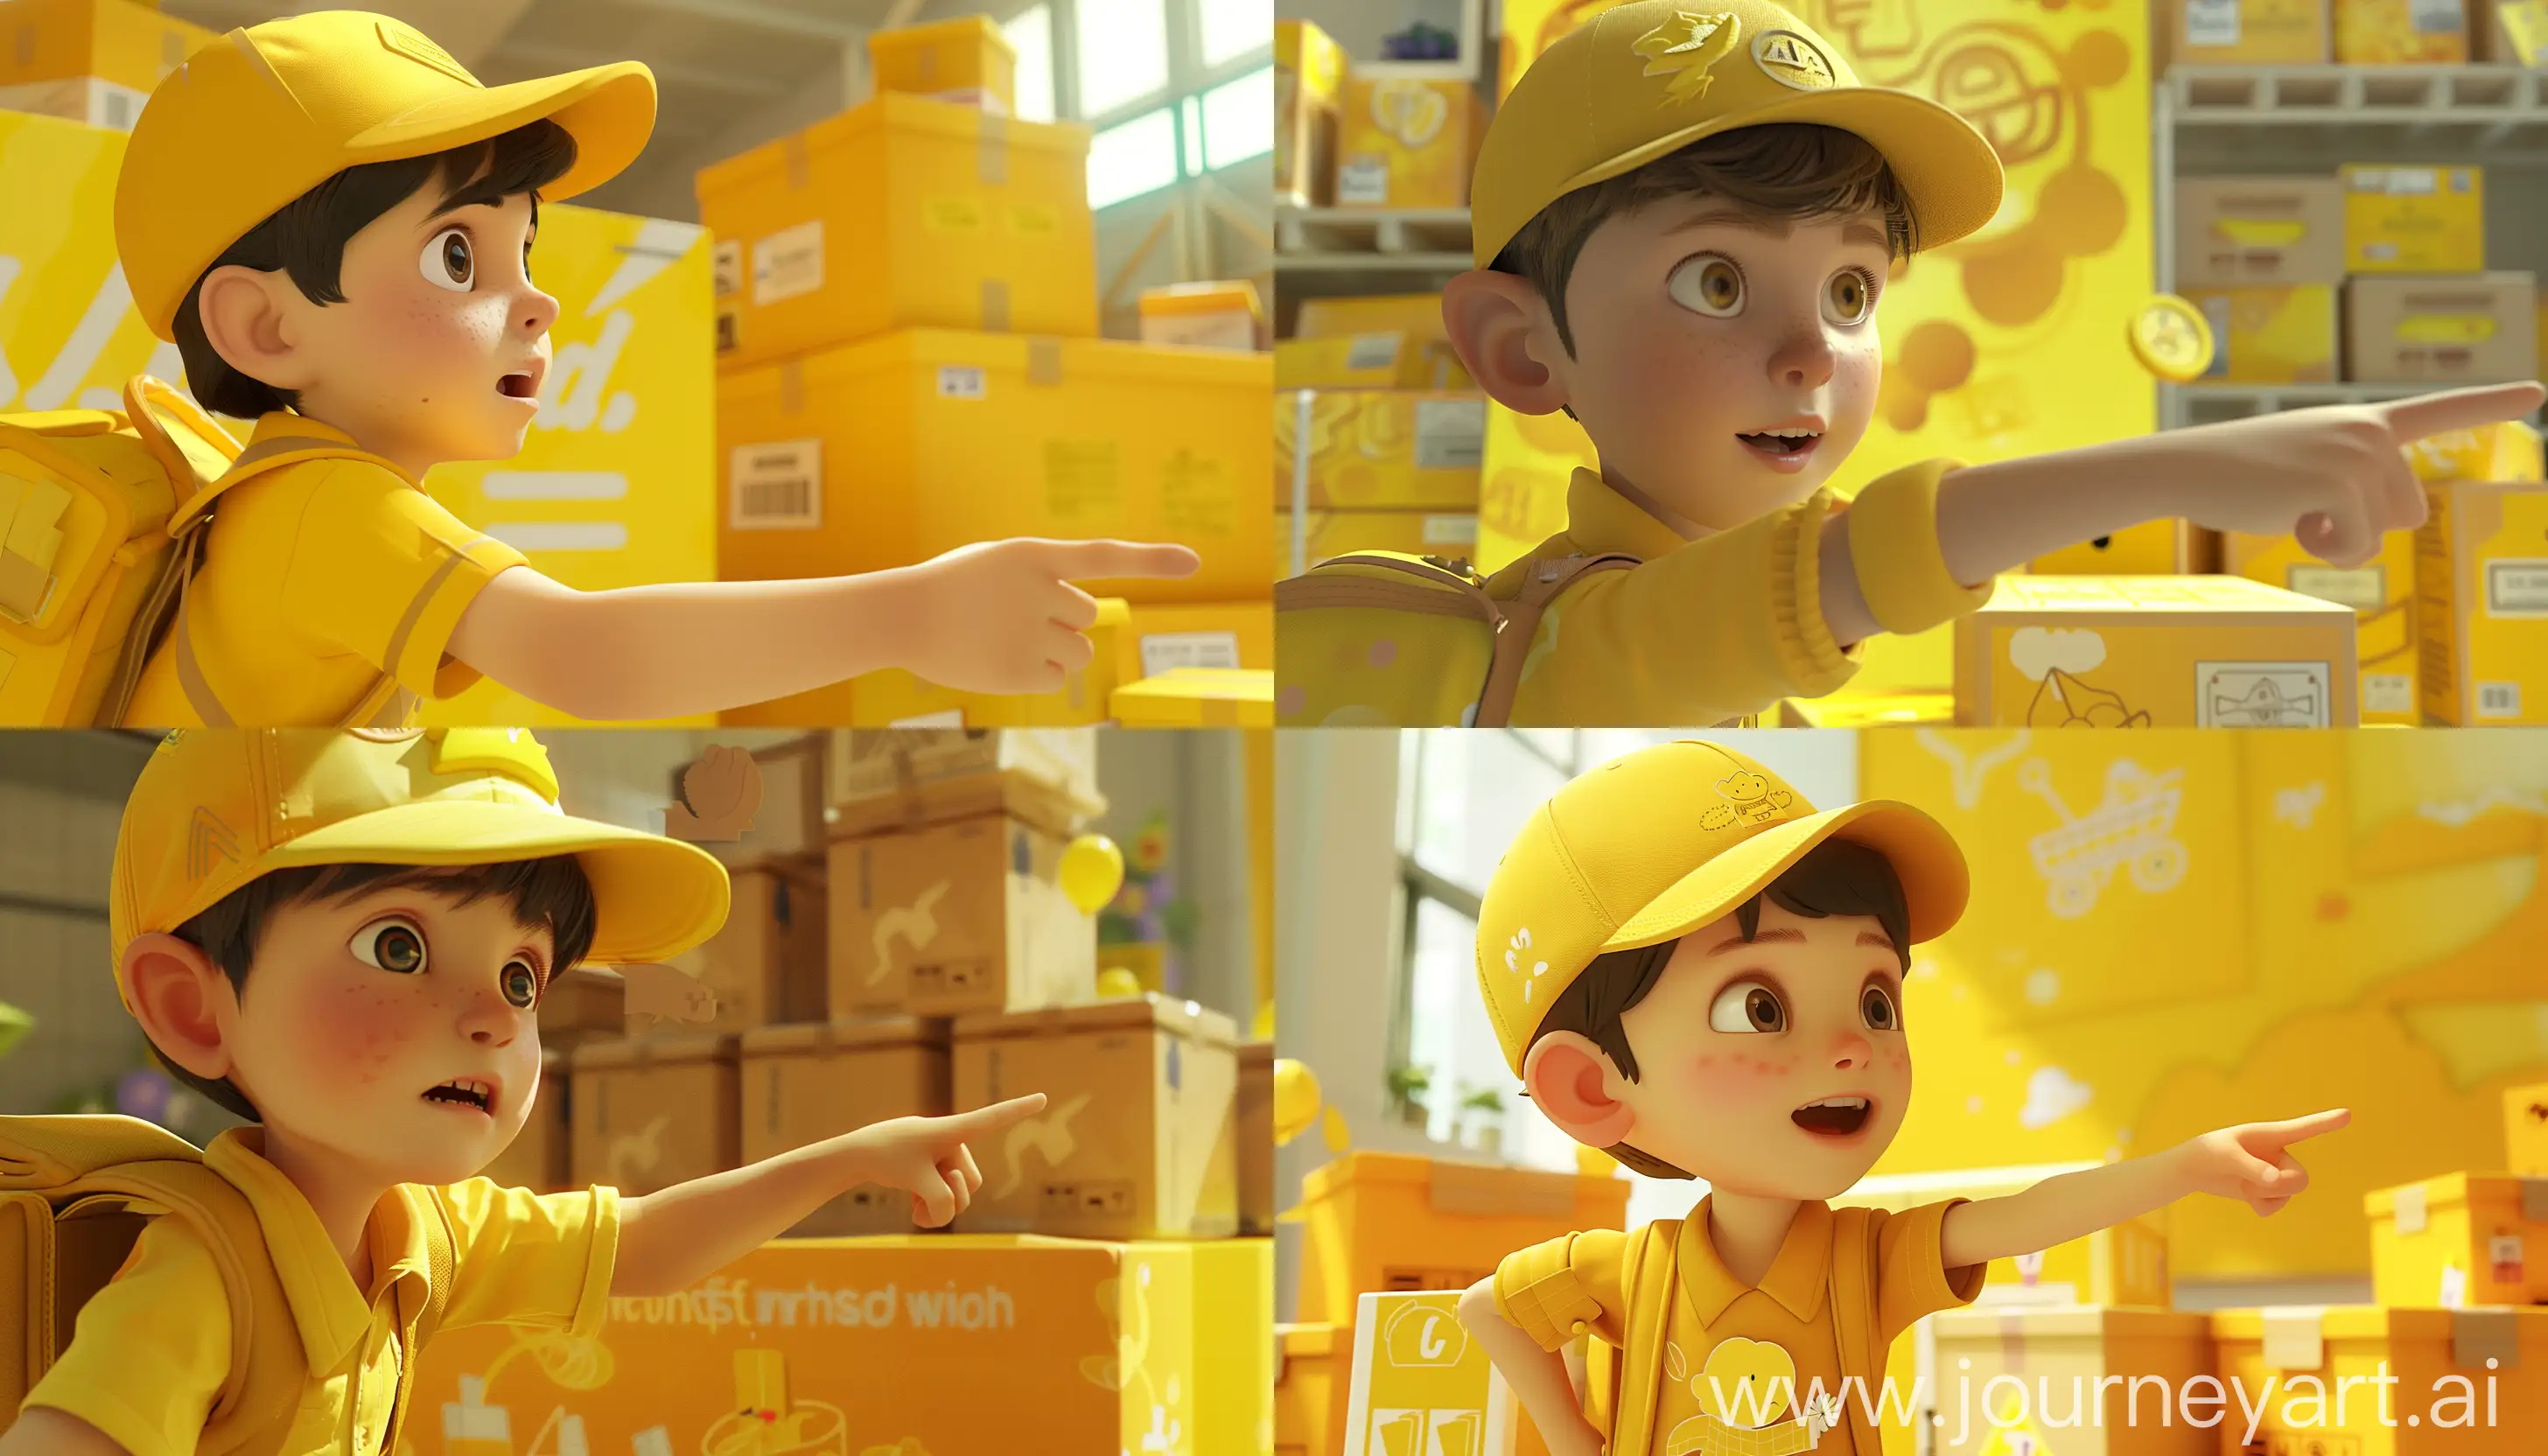 Vibrant-Yellow-Banner-Boy-in-Yellow-Hat-Pointing-Right-Amid-Yellow-Theme-and-Boxes